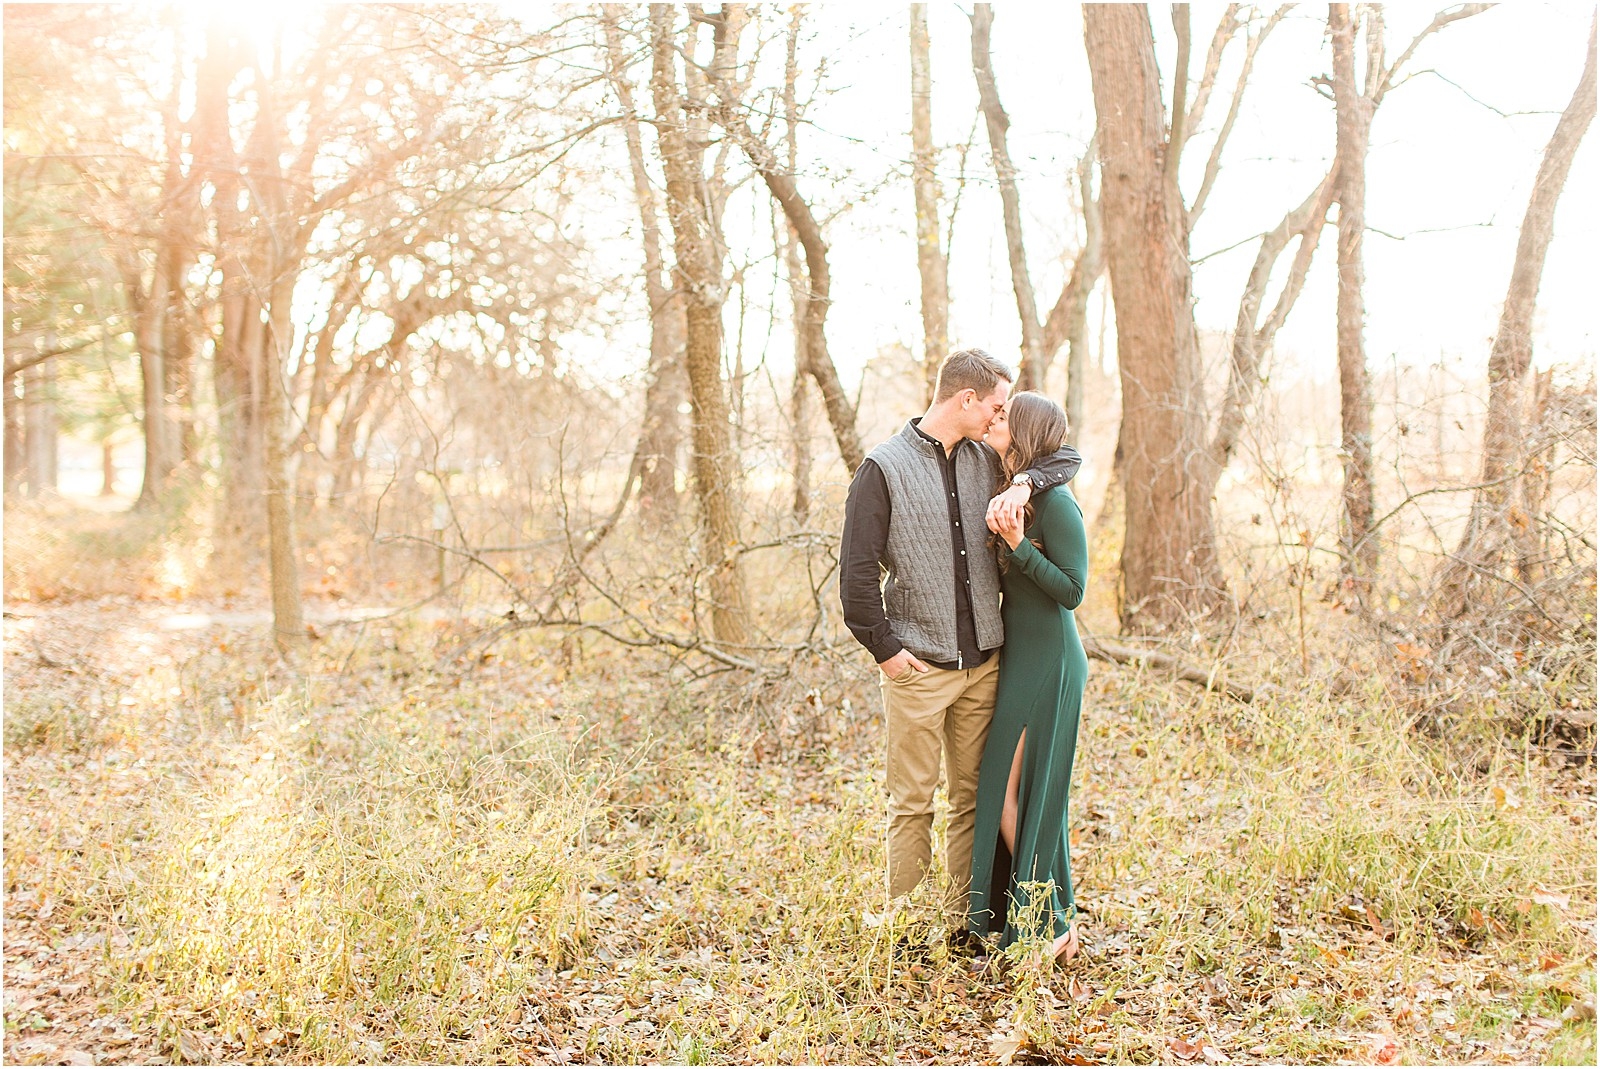 Kaley and Devon's fall Evansville Indiana engagement session. | #fallengagementsession #evansvilleindiana #evansvilleindianawedding | 0020.jpg